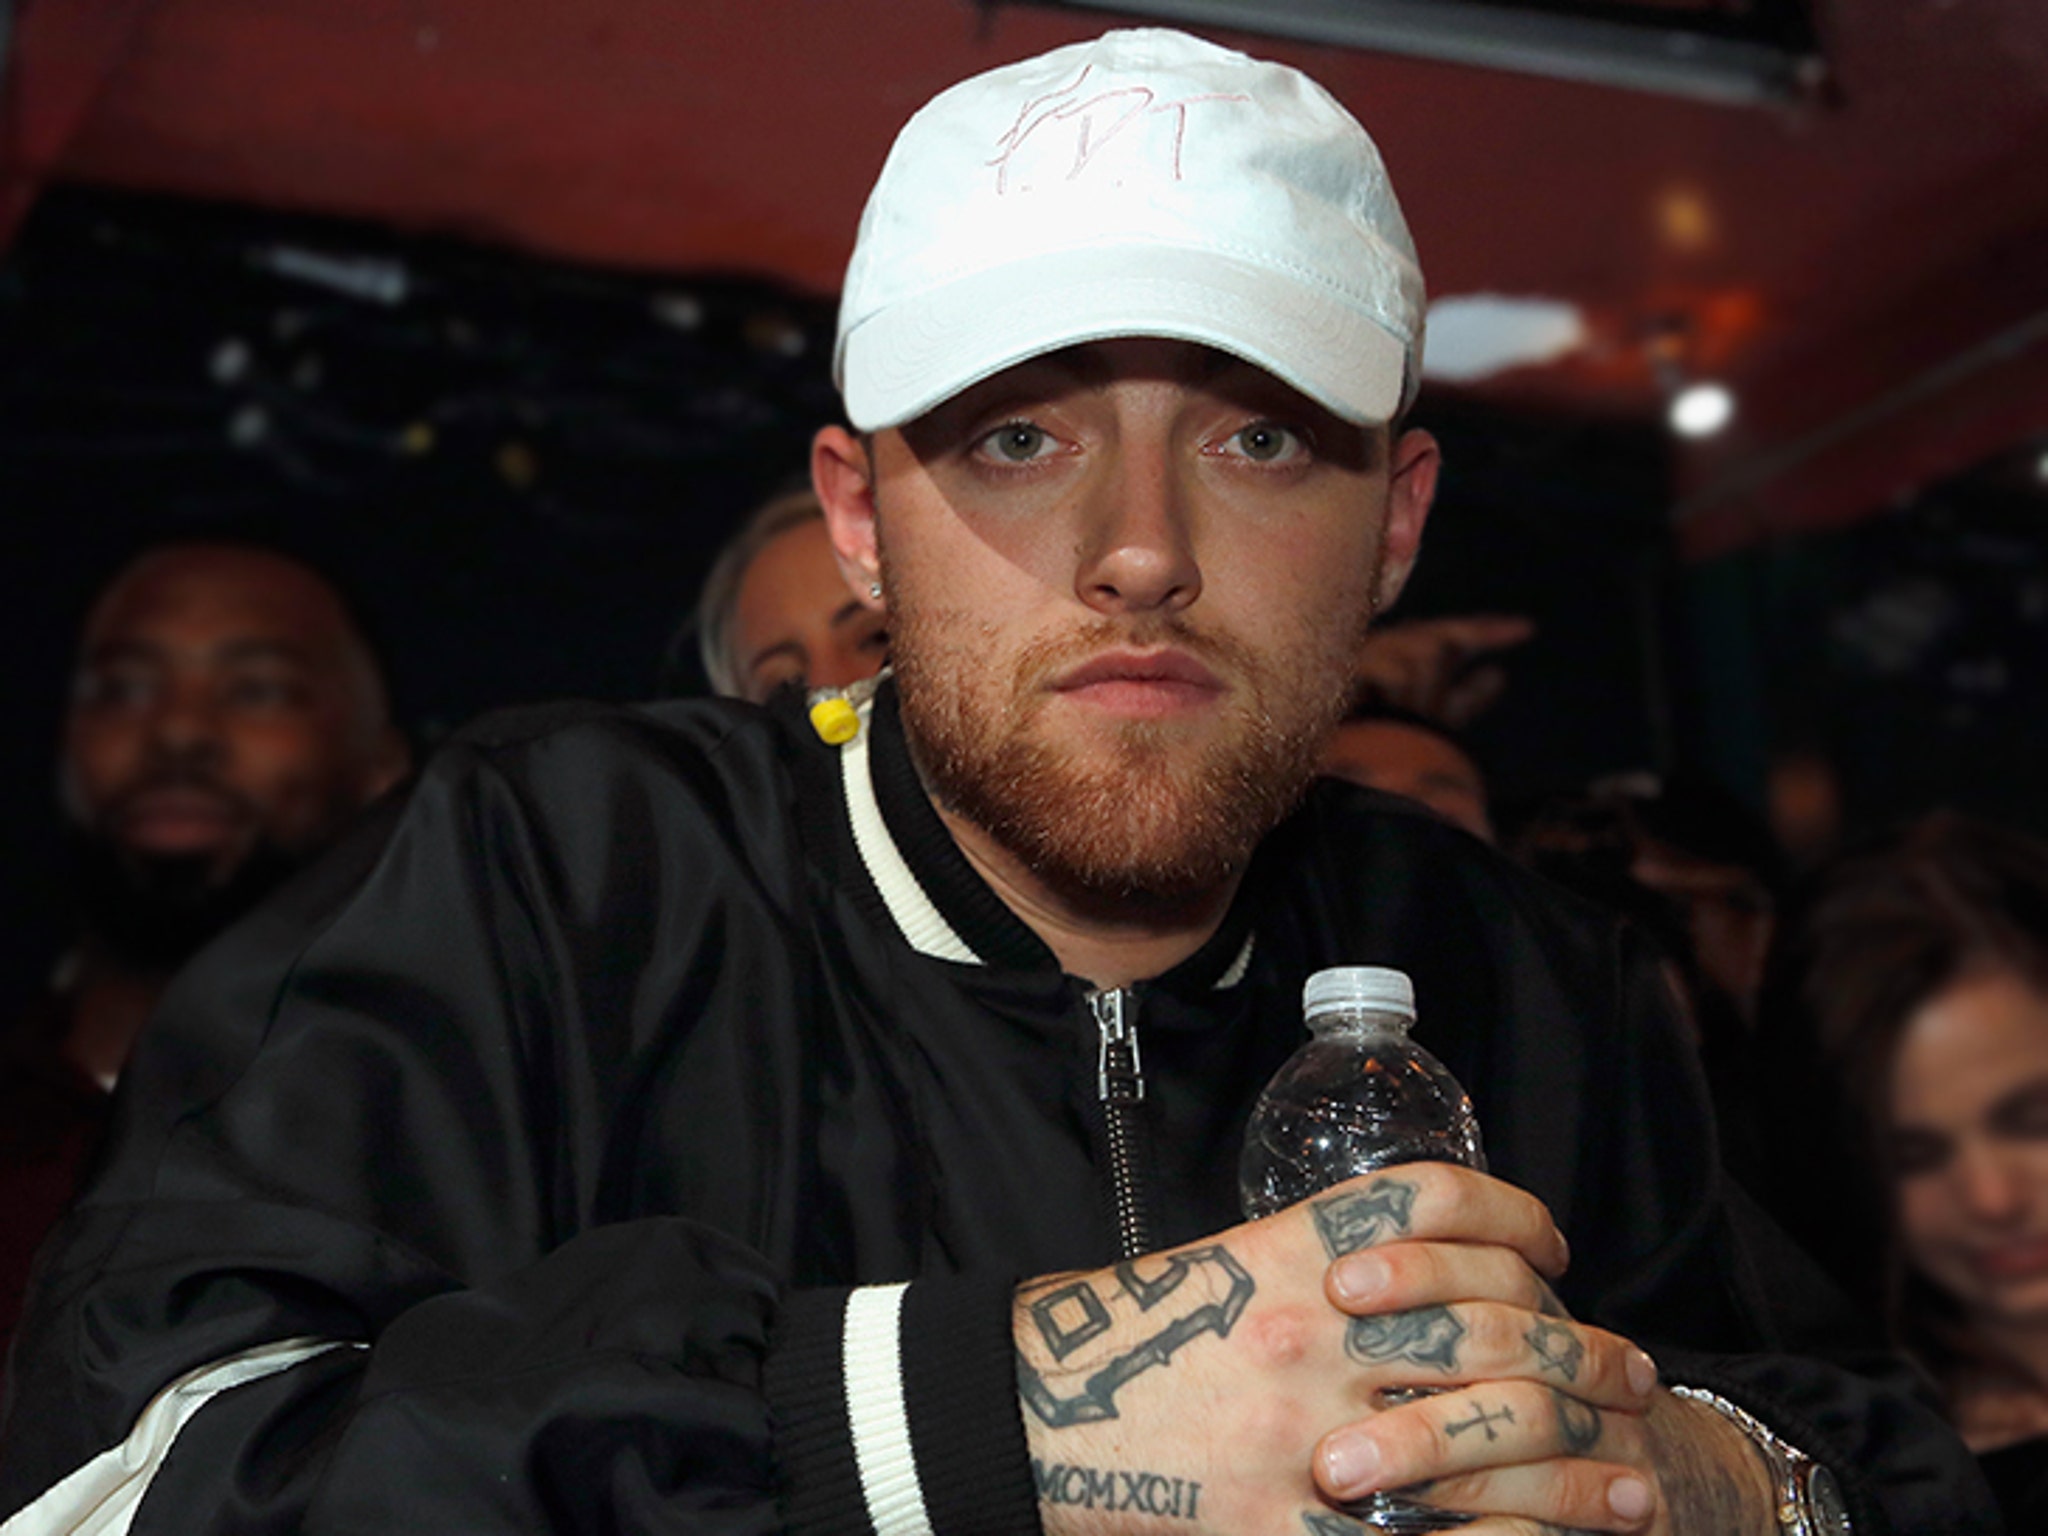 Report: Mac Miller's Funeral To Be Held In Pittsburgh - CBS Pittsburgh